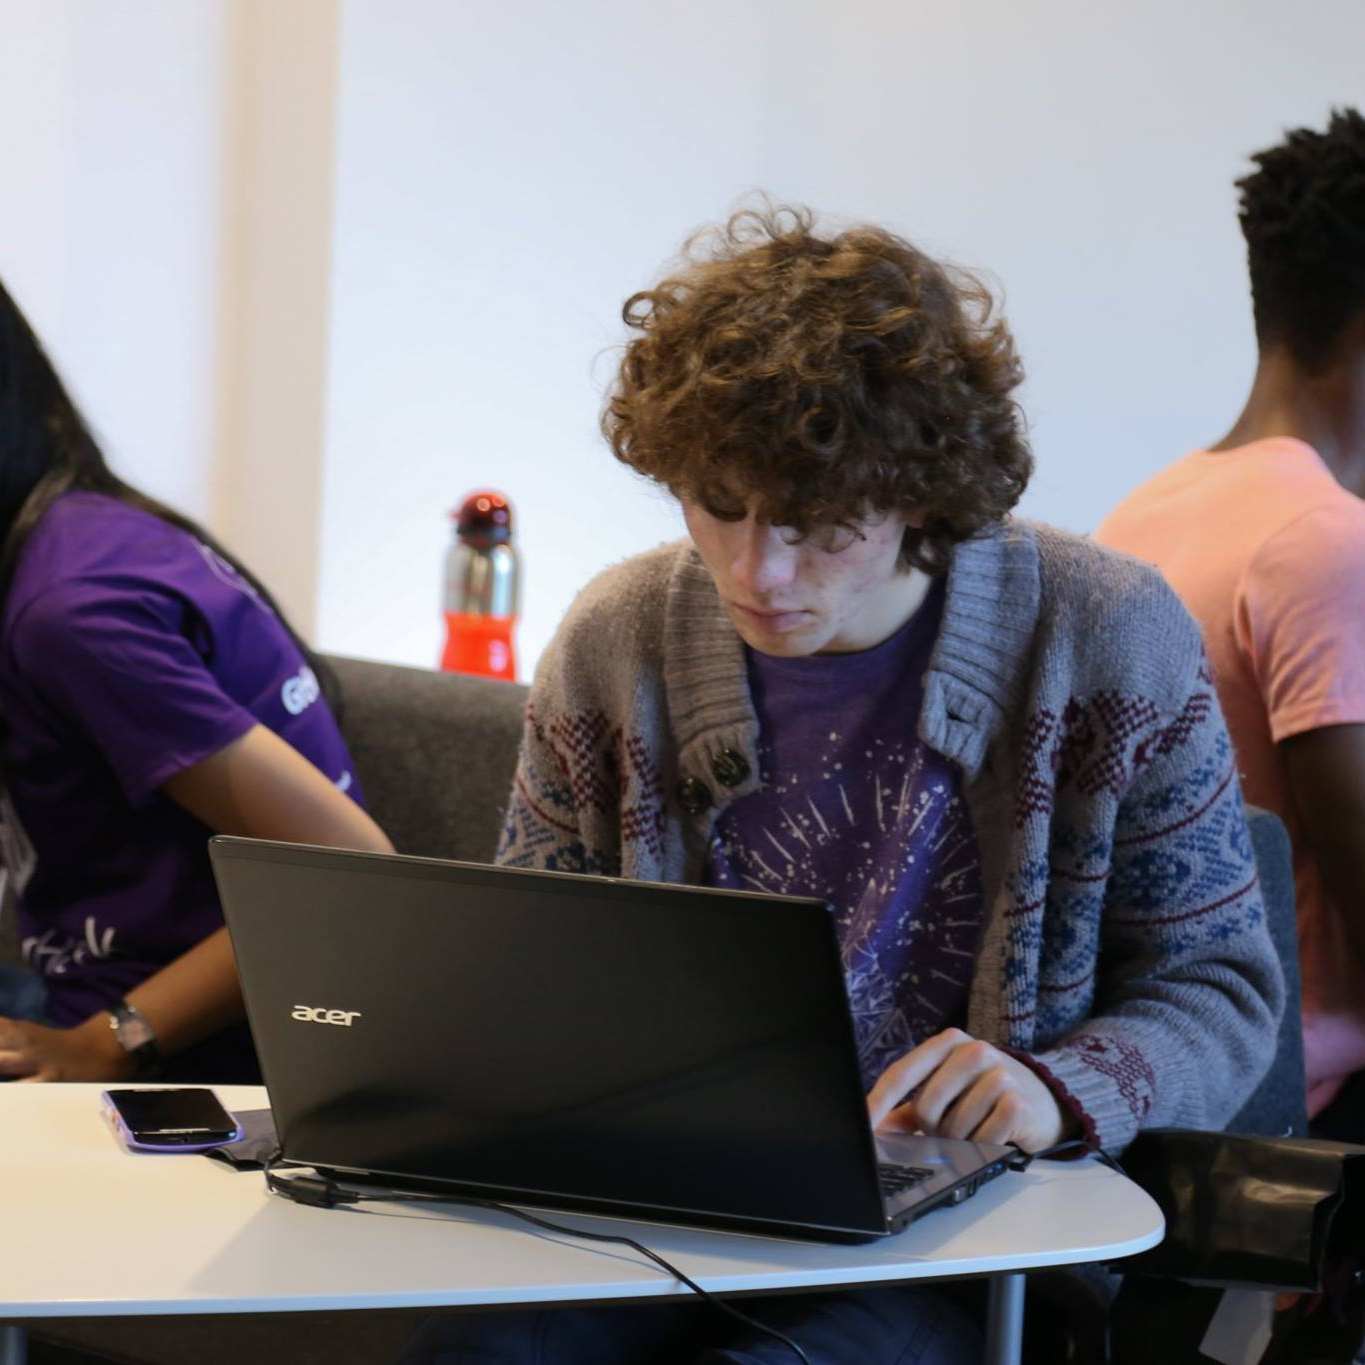 Me as a floppy-haired student sitting in front of my laptop during a Hackathon